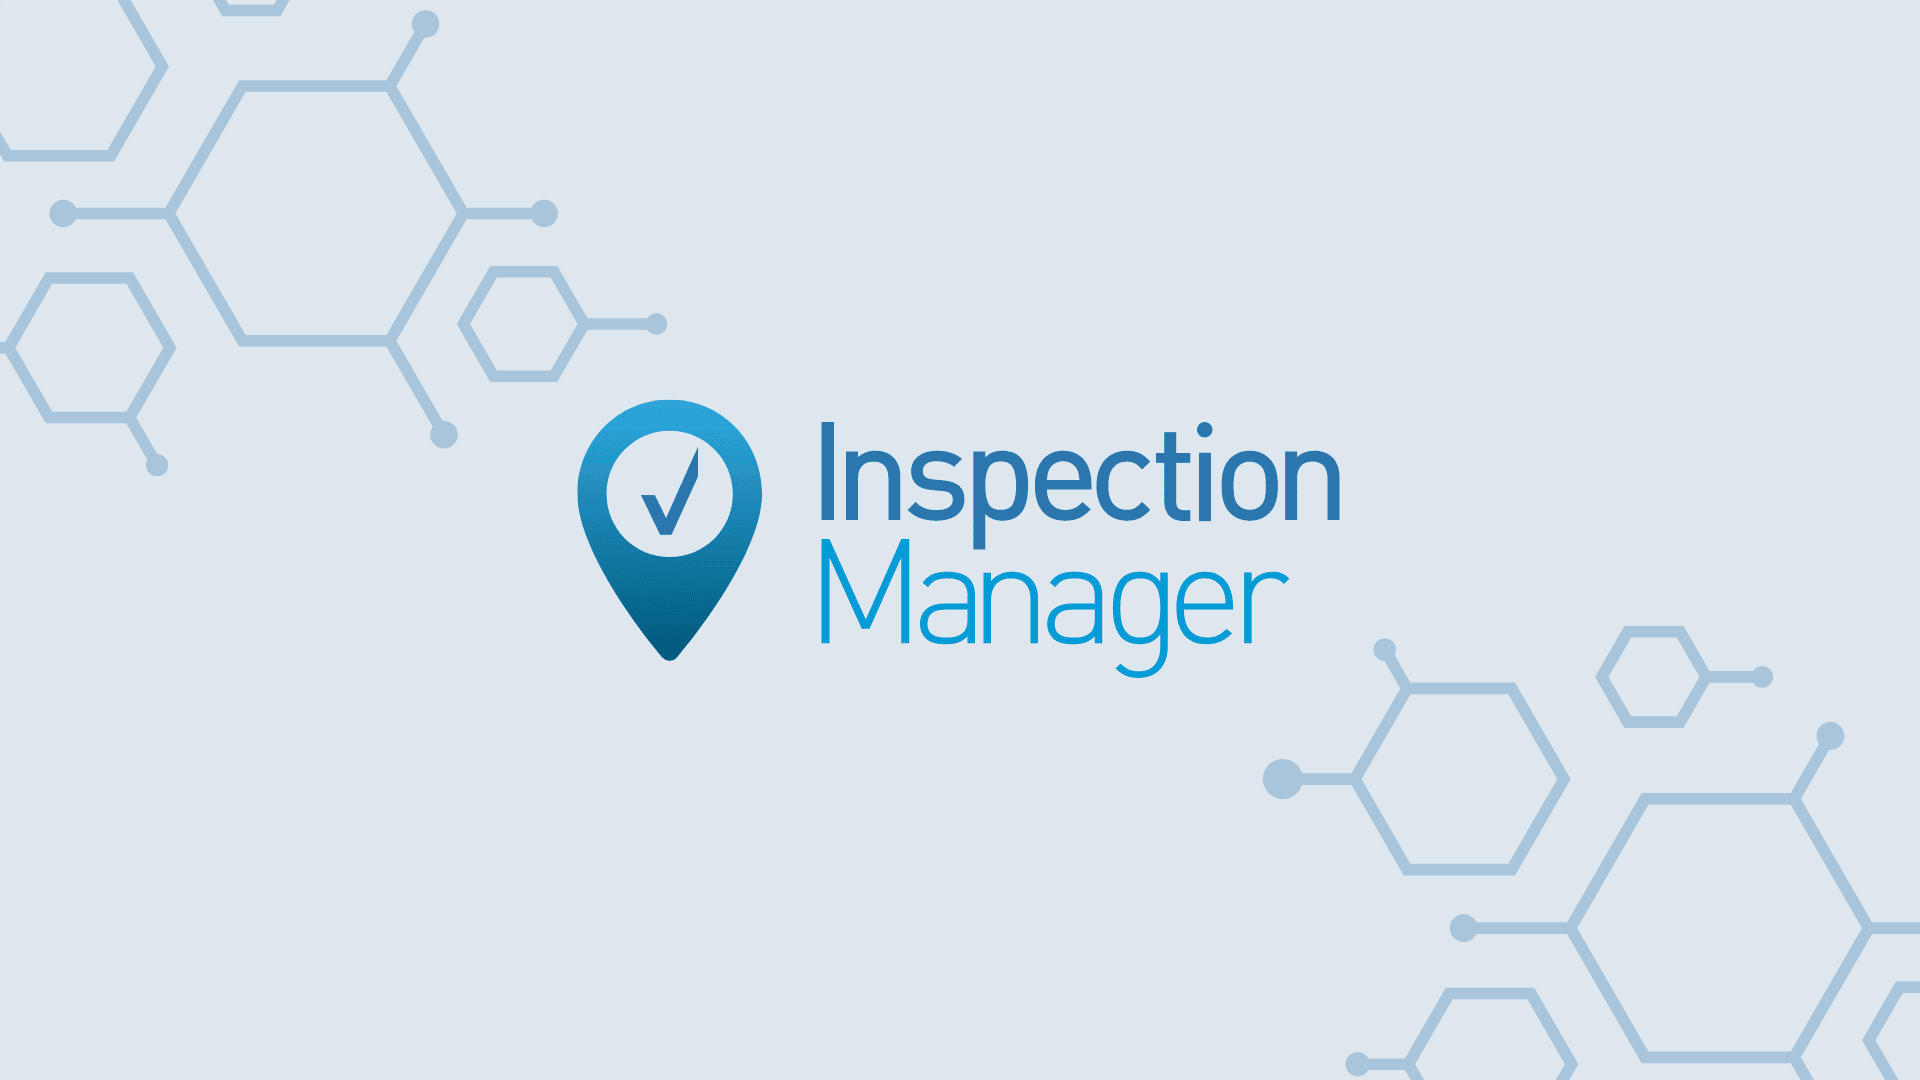 Inspection Manager Logo